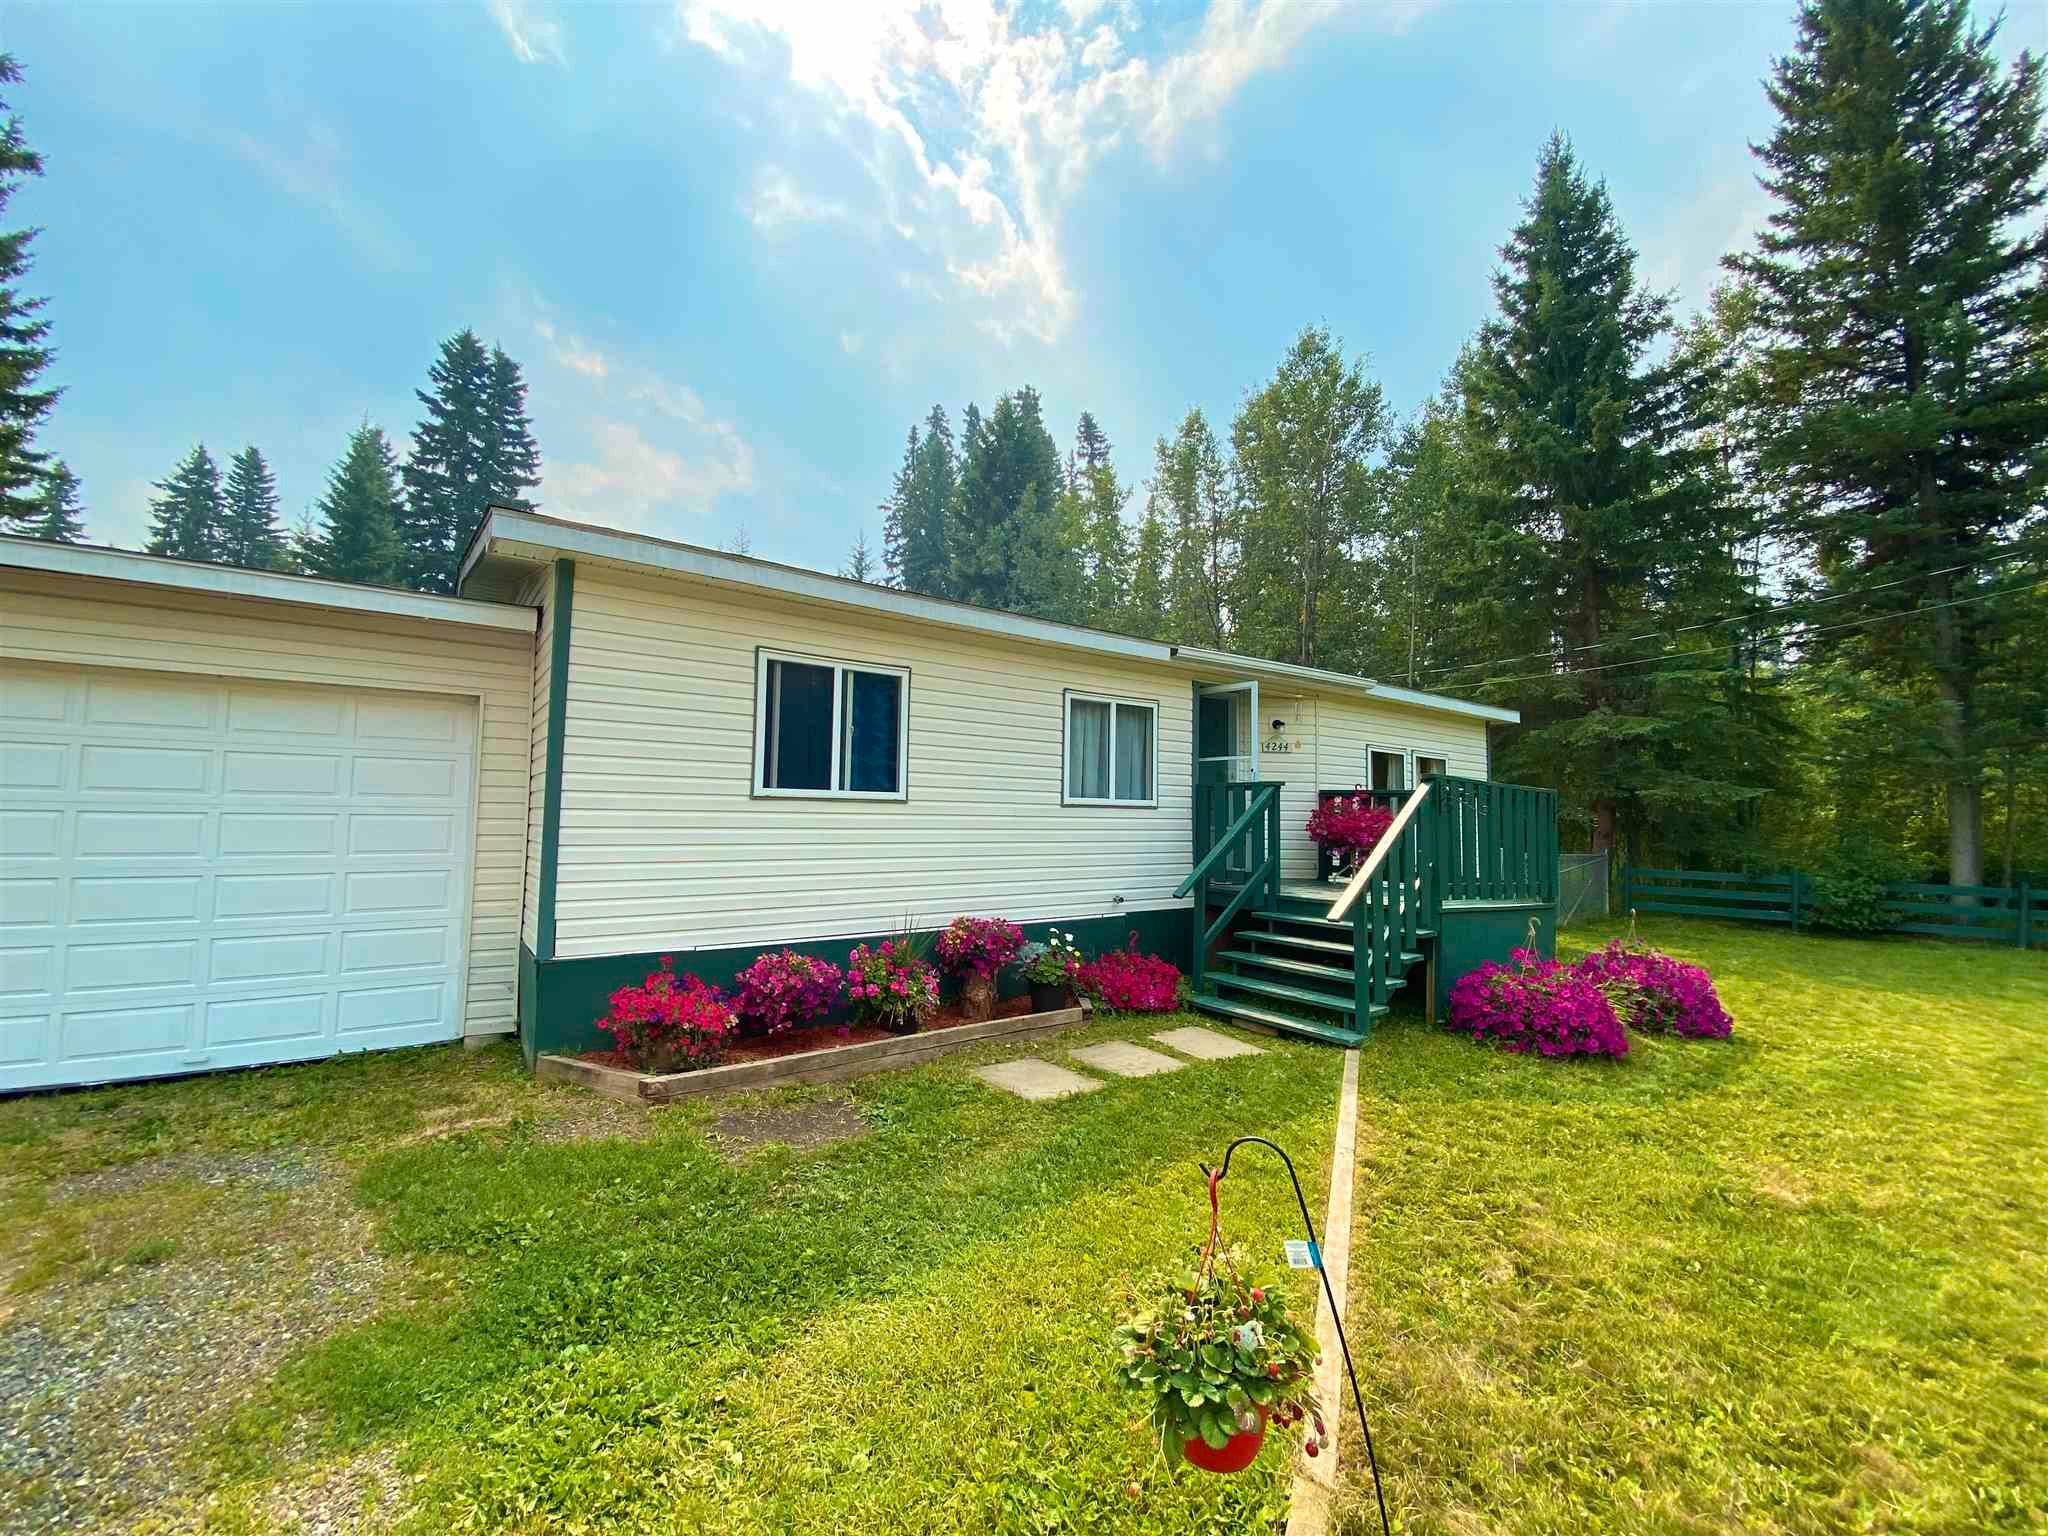 New property listed in Williams Lake - Rural North, Williams Lake (Zone 27)